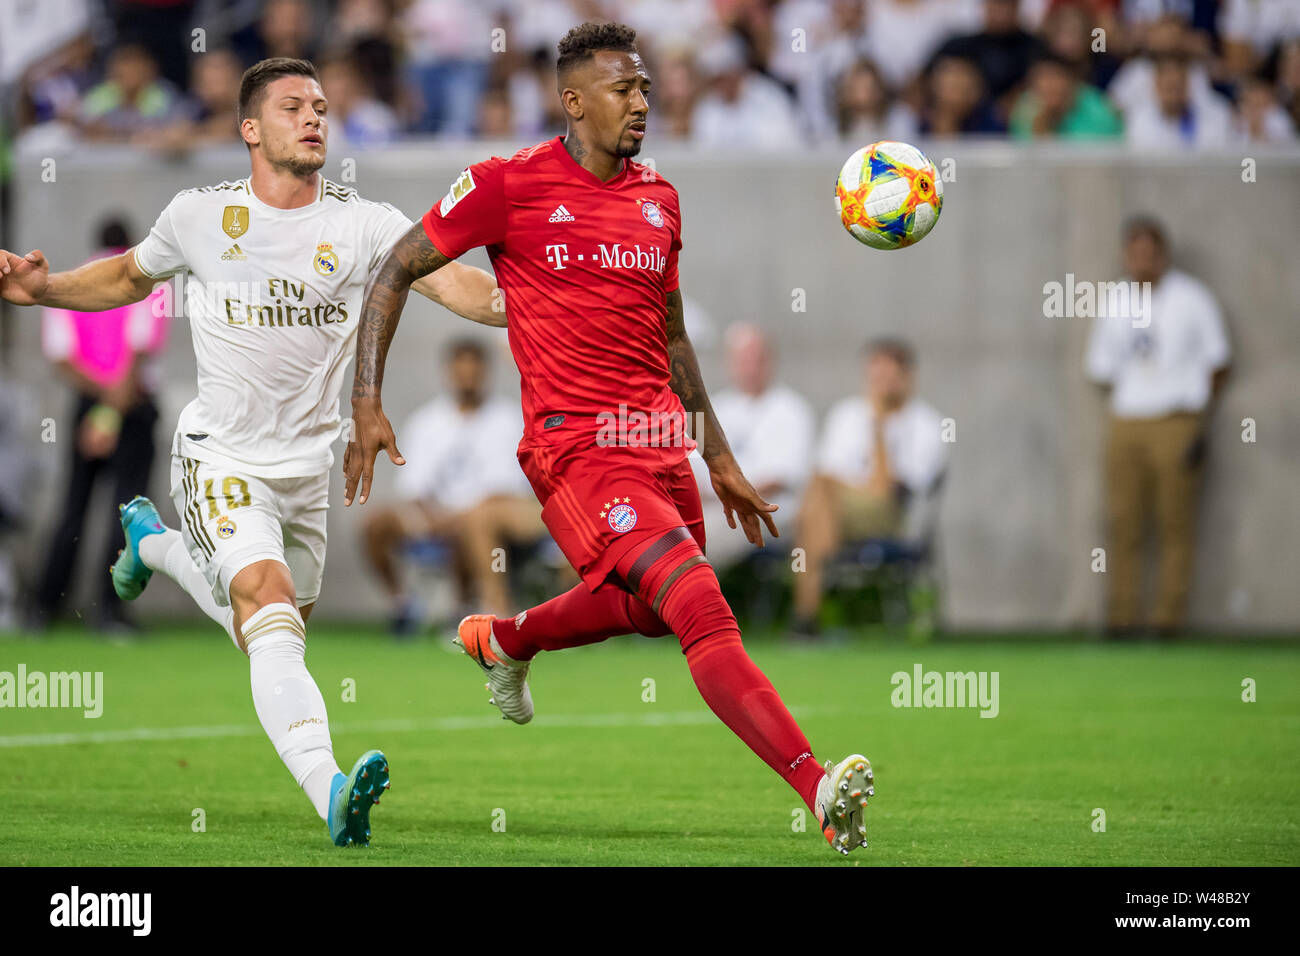 Houston, TX, USA. 20th July, 2019. Bayern Munich defender Jerome Boateng (17) shields the ball from Real Madrid forward Luka Jovic (18) during the second half of an International Champions Cup soccer match between FC Bayern Munich and Real Madrid at NRG Stadium in Houston, TX. FC Bayern won the game 3 to 1.Trask Smith/CSM/Alamy Live News Stock Photo